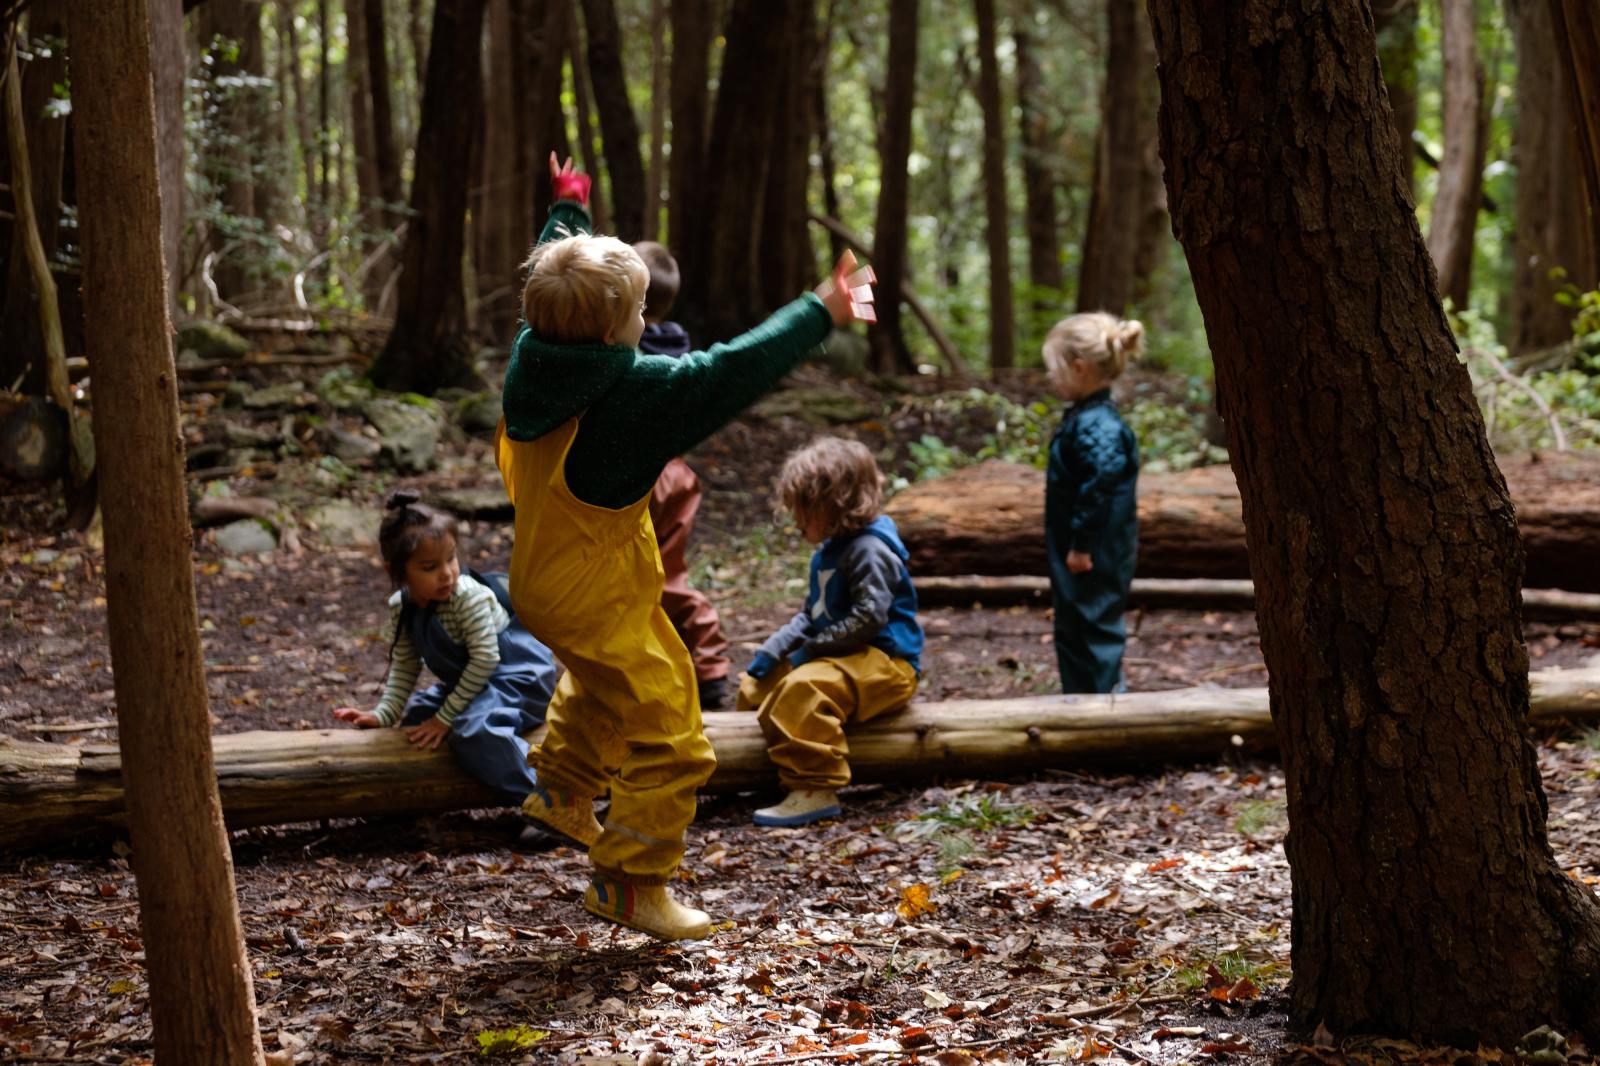 Forest Folk is an all outdoor s...stly free play in the outdoors.